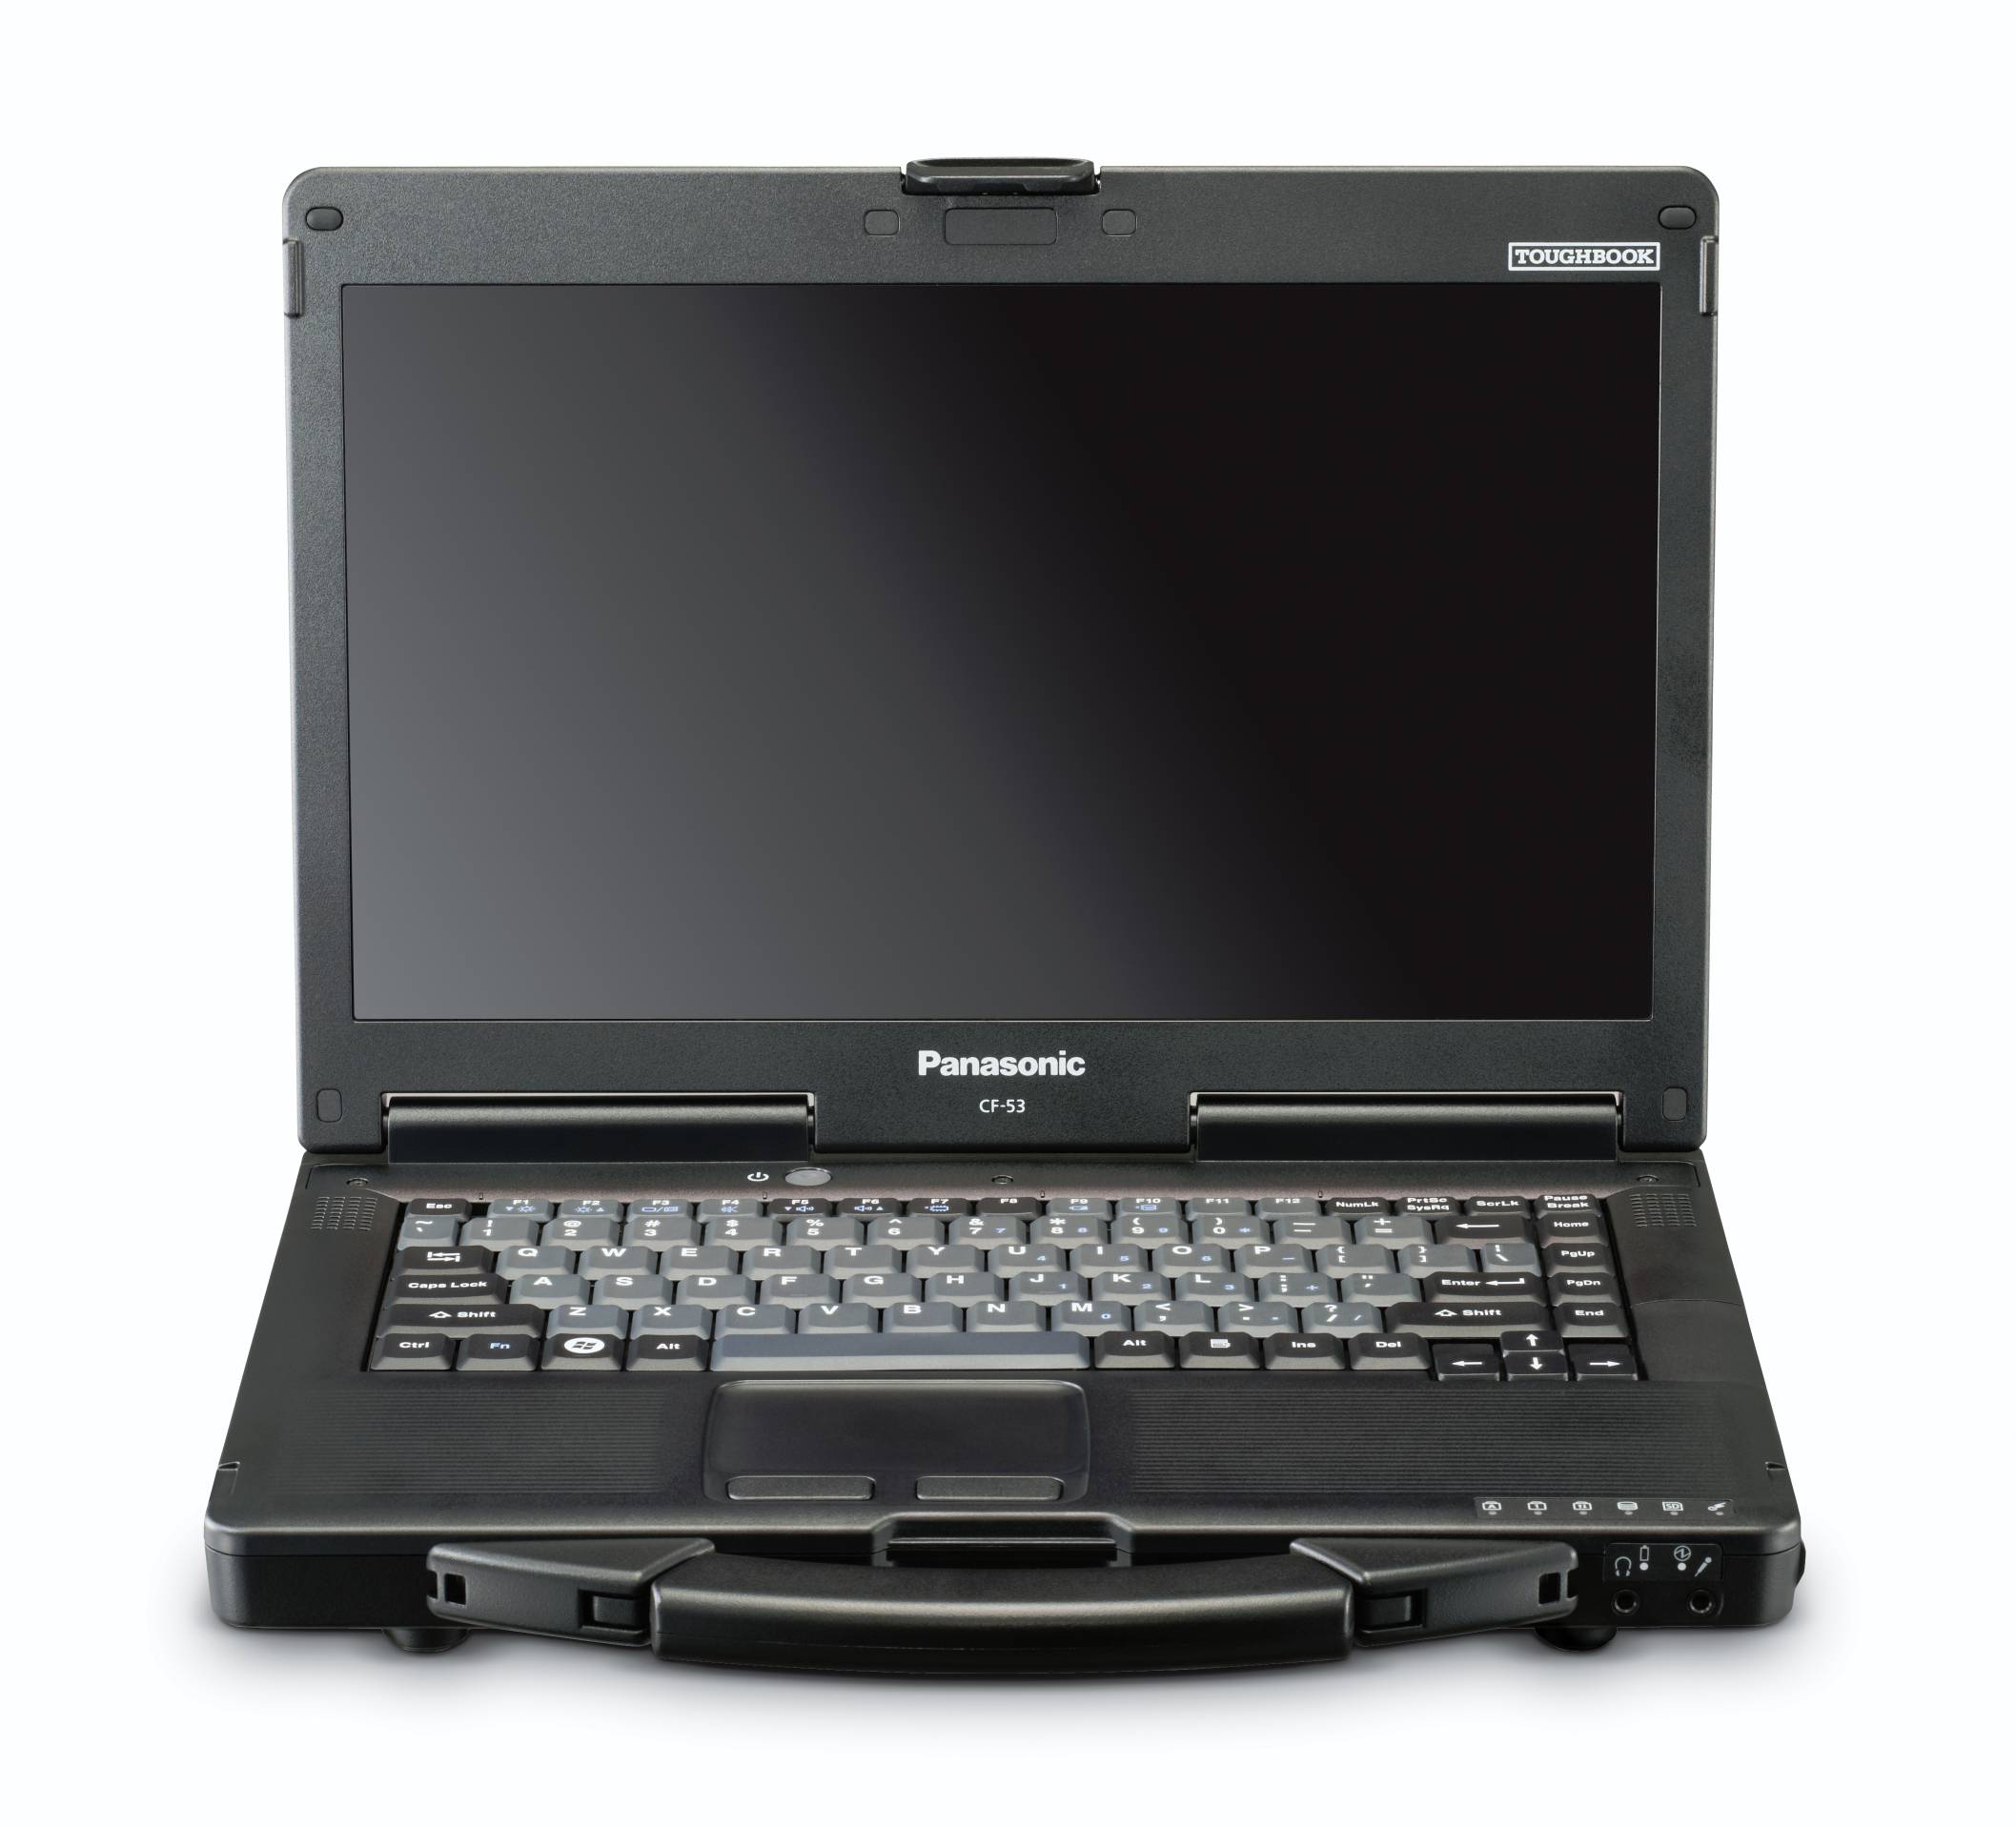 Used Panasonic A Grade CF-53 Toughbook 14-inch (High Definition-720p LED 1366 x 768) 2.5GHz Core i5 320GB HD 4 GB Memory CD Drive Win 7 Pro OS Power Adapter Included - image 1 of 3